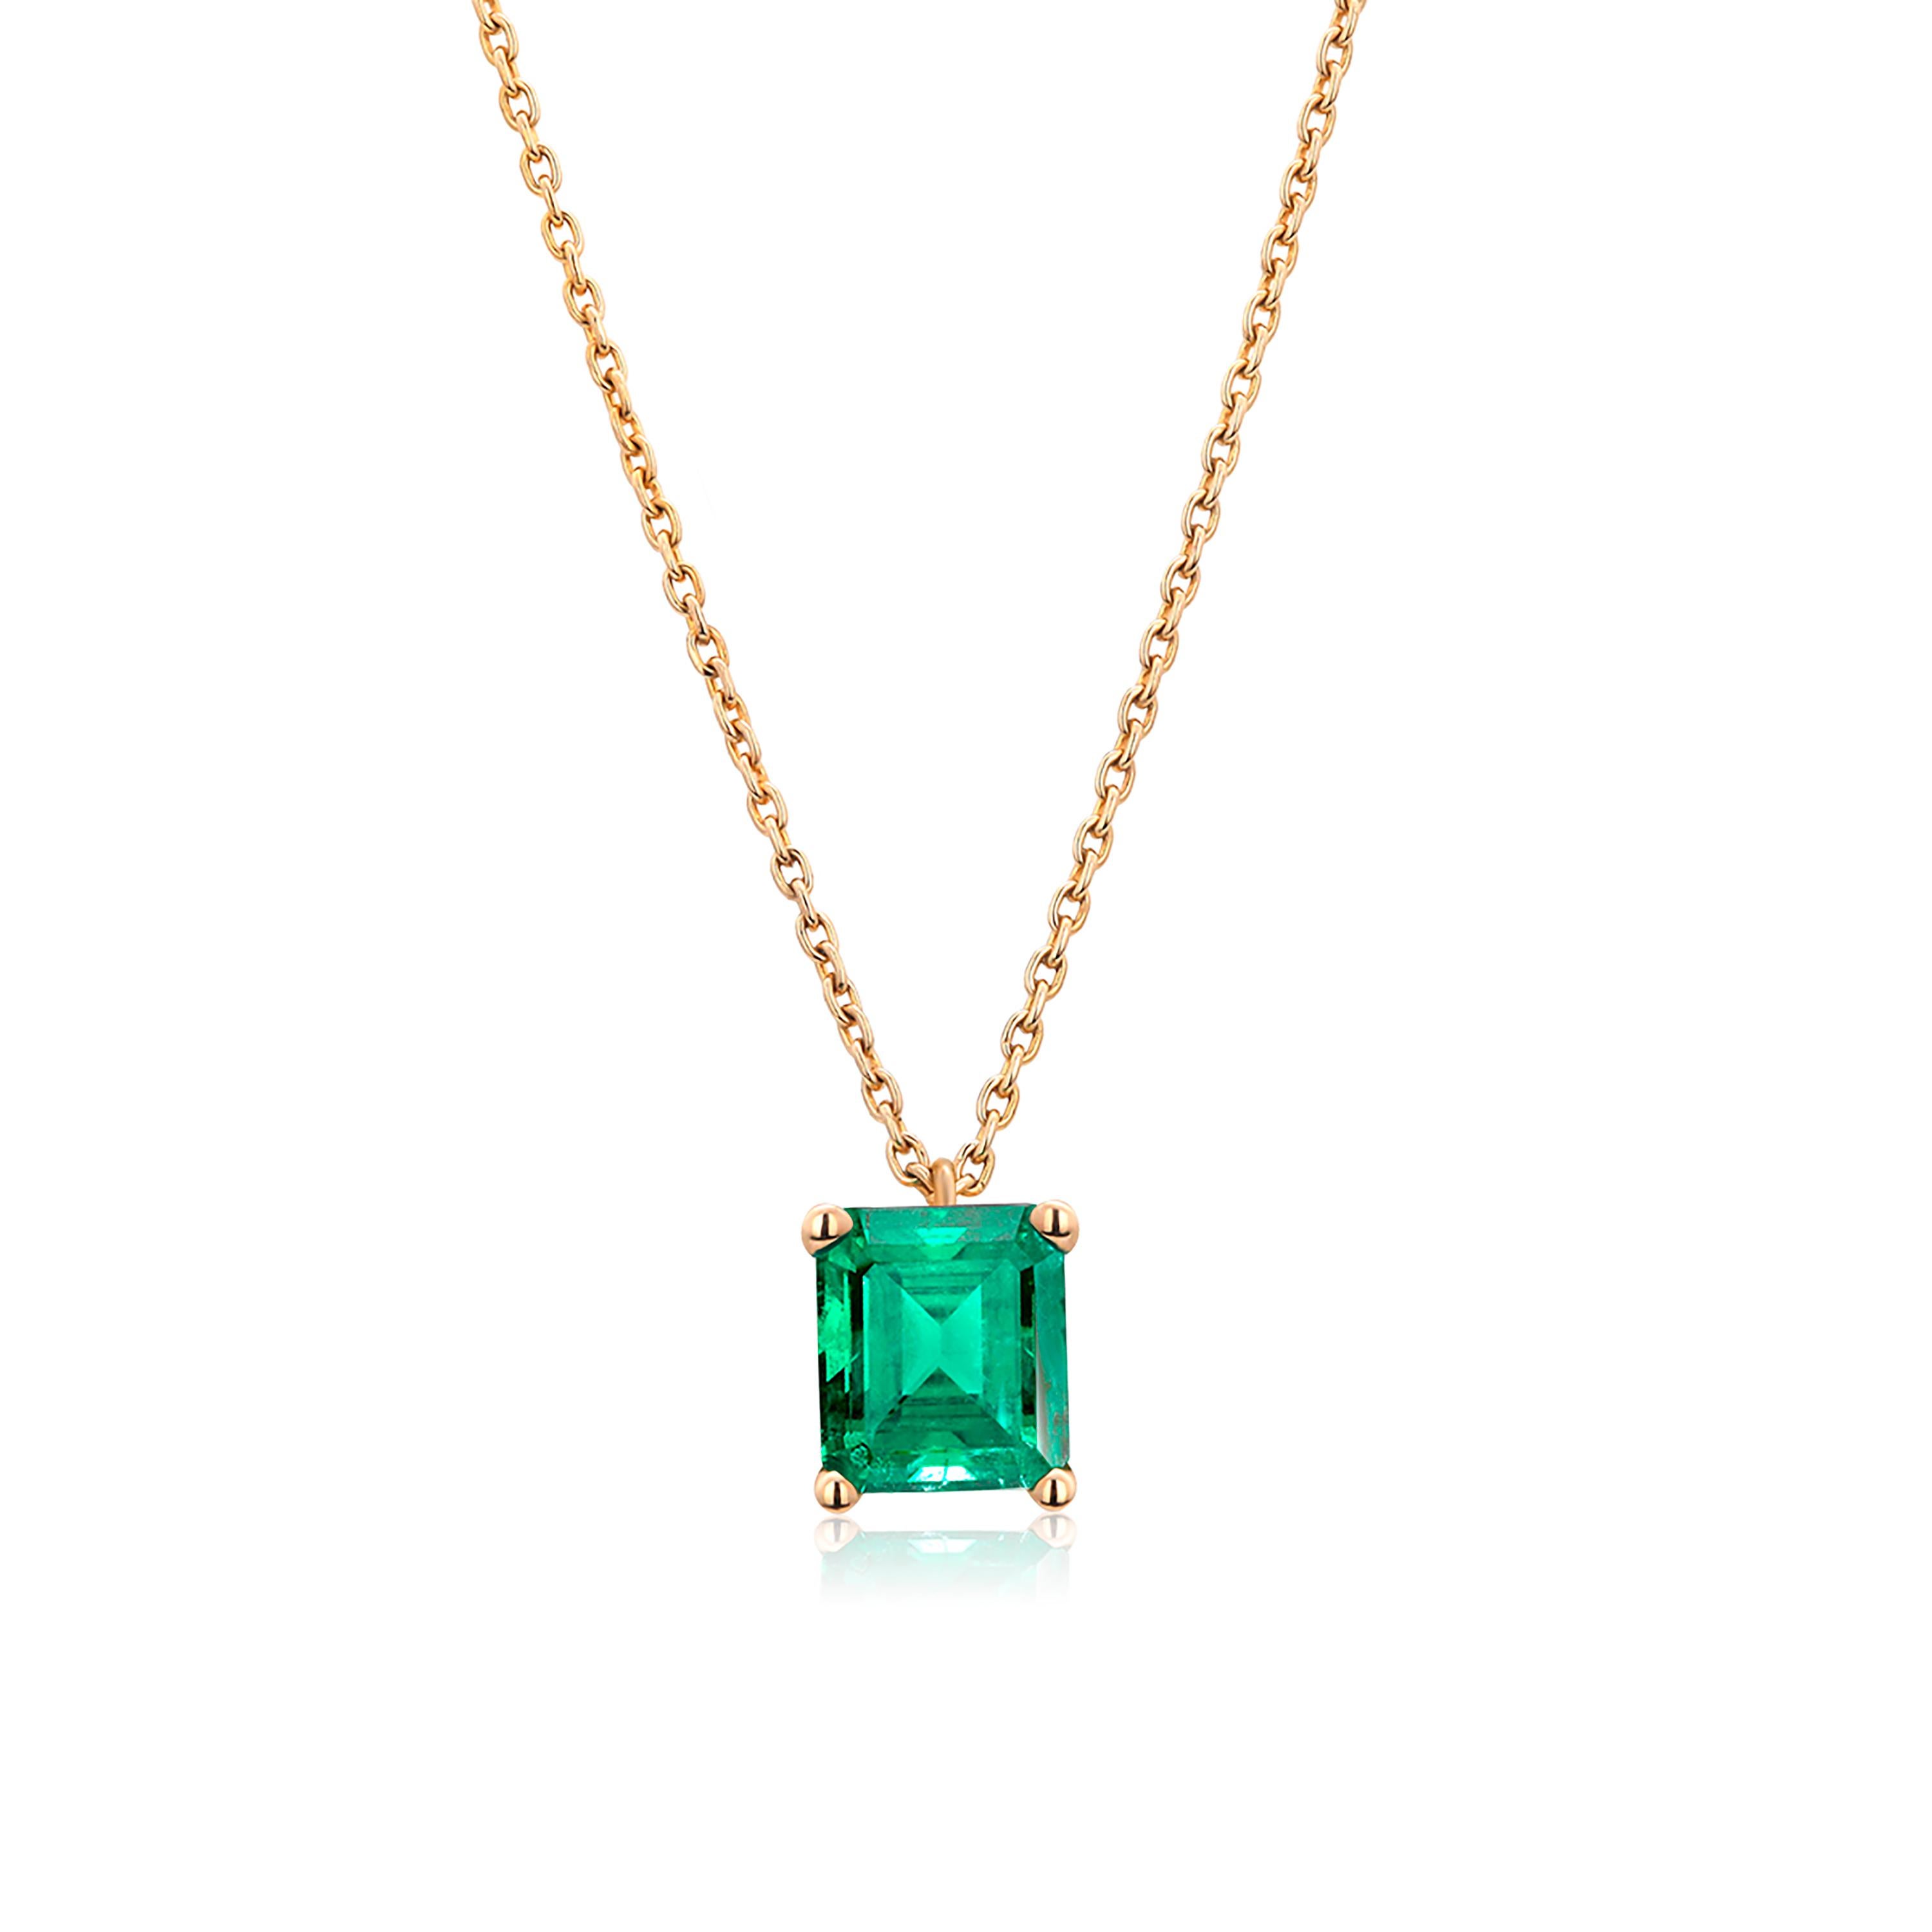 14 karats yellow gold necklace pendant with Colombia emerald
Necklace measuring 16 inches long
Colombia emerald-cut emerald  weighing 0.65 carats
Emerald color hue is grass green
Cable chain necklace with lobster spring lock
New Necklace
Our design